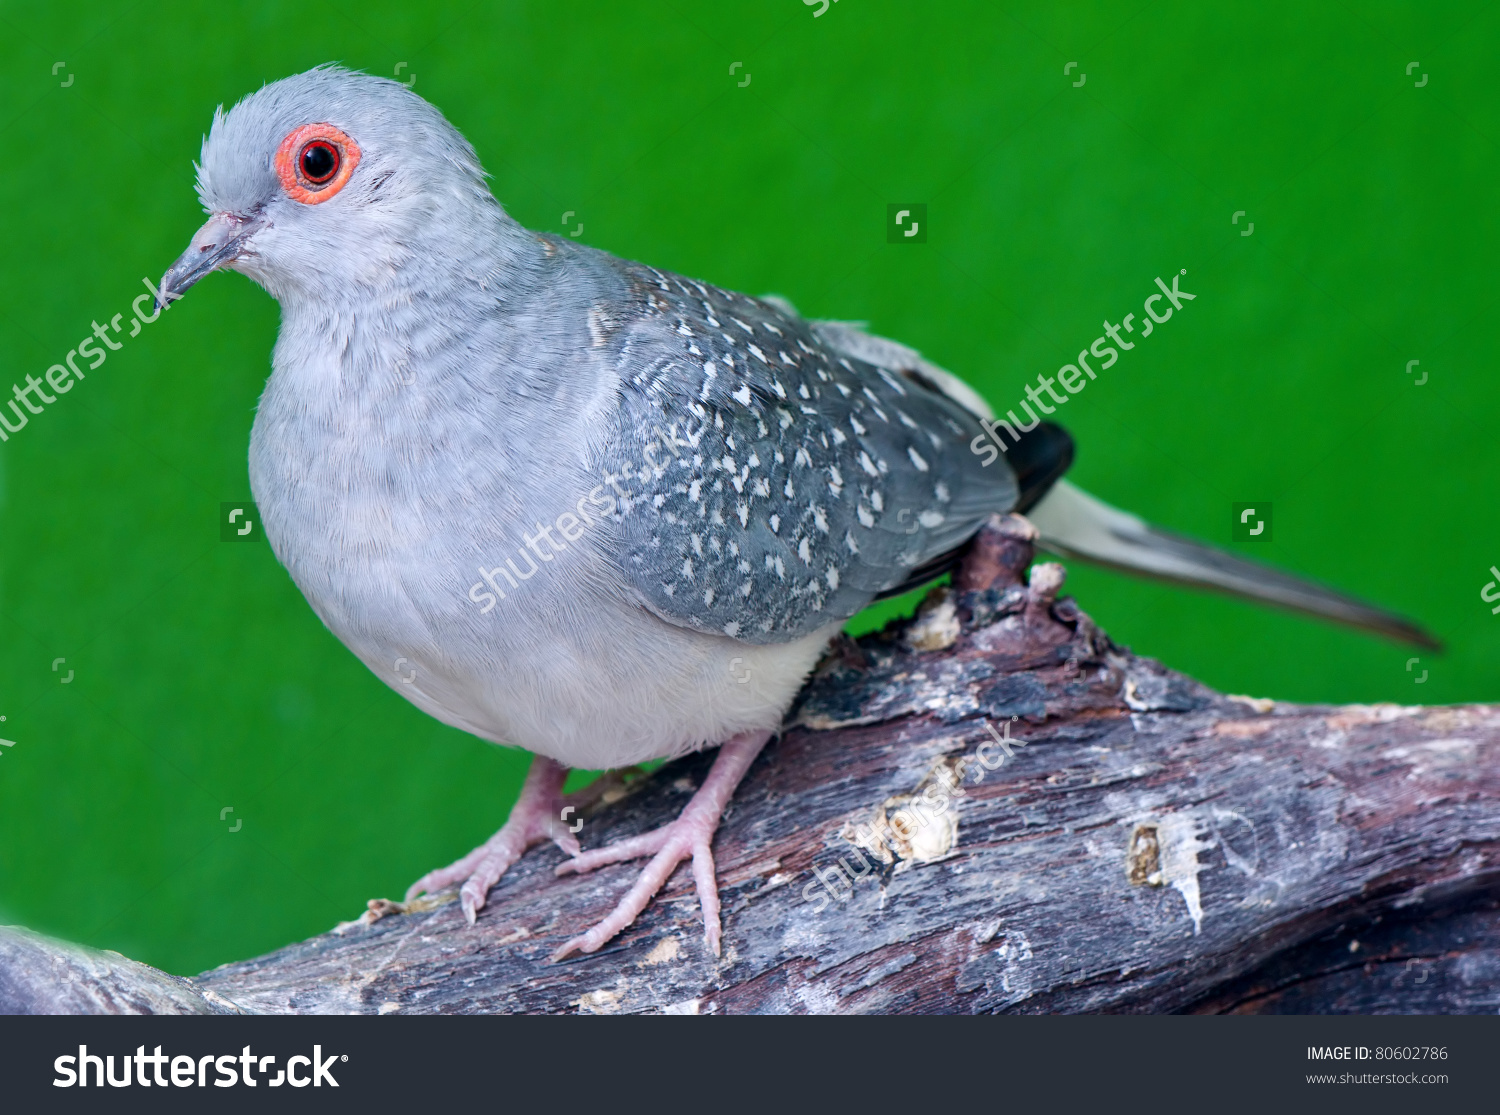 The Spotted Pigeon clipart #3, Download drawings